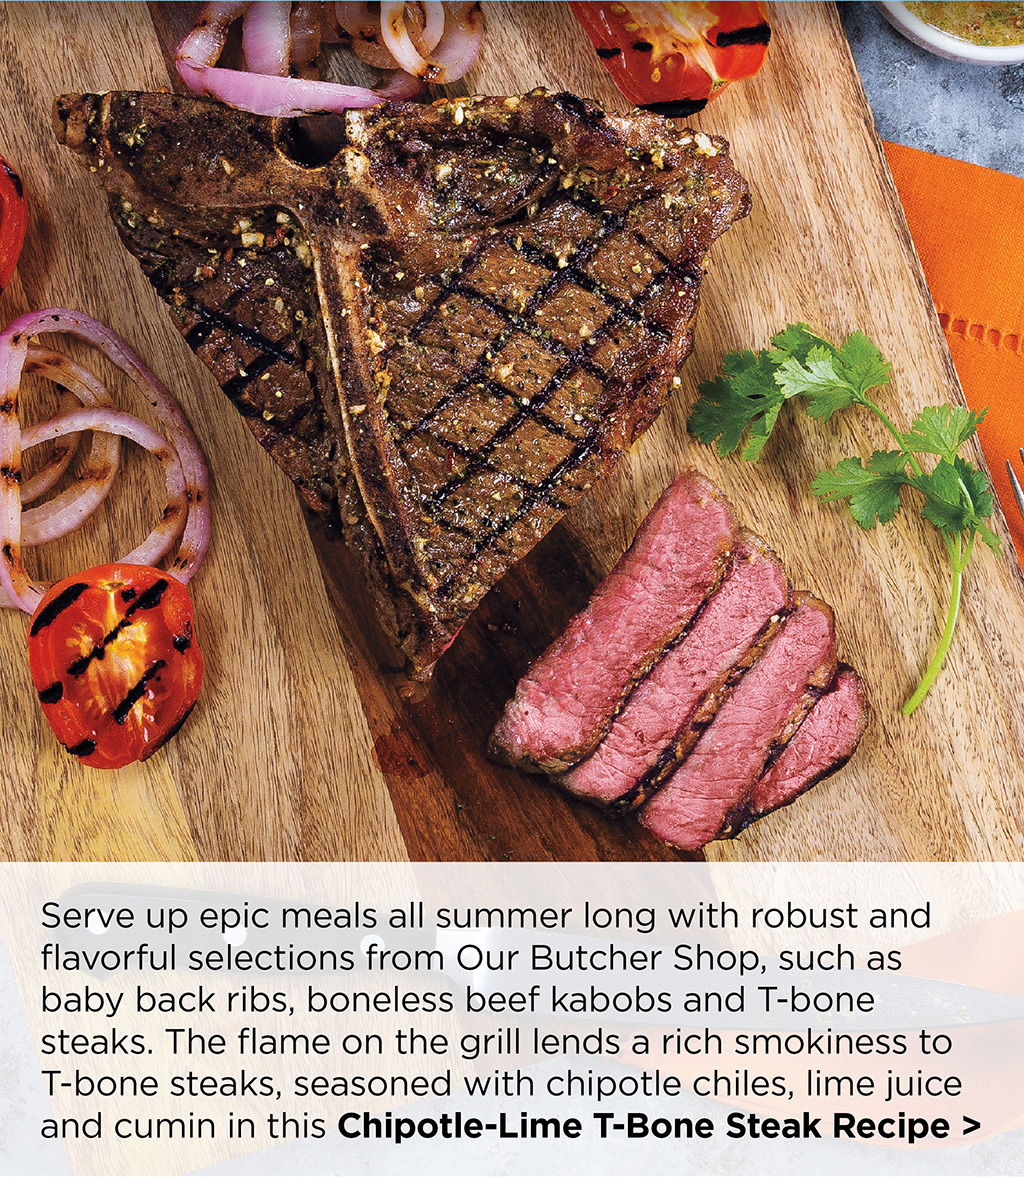 Serve up epic meals all summer long with robust and flavorful selections from Our Butcher Shop, such as baby back ribs, boneless beef kabobs and T-bone steaks. The flame on the grill lends a rich smokiness to T-bone steaks, seasoned with chipotle chiles, lime juice and cumin in this Chipotle-Lime T-Bone Steak Recipe >